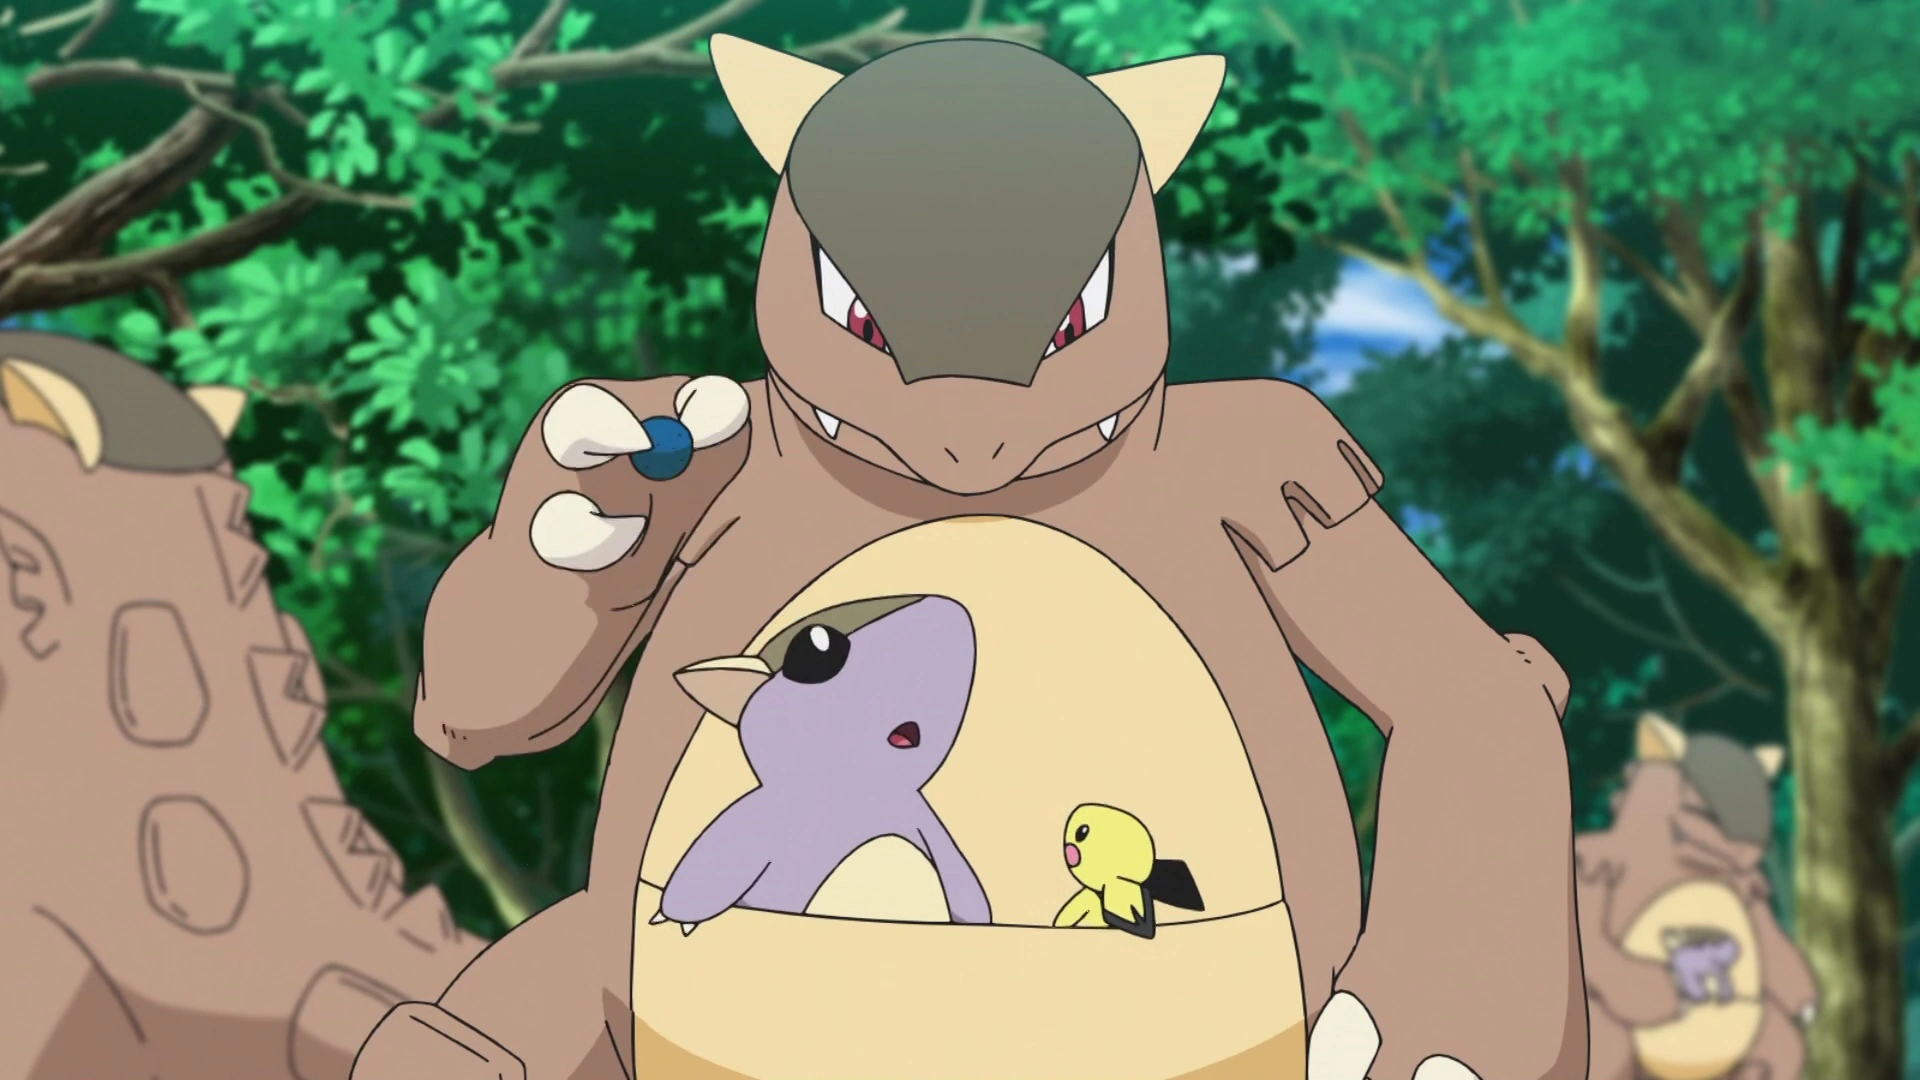 17 Facts About Kangaskhan 